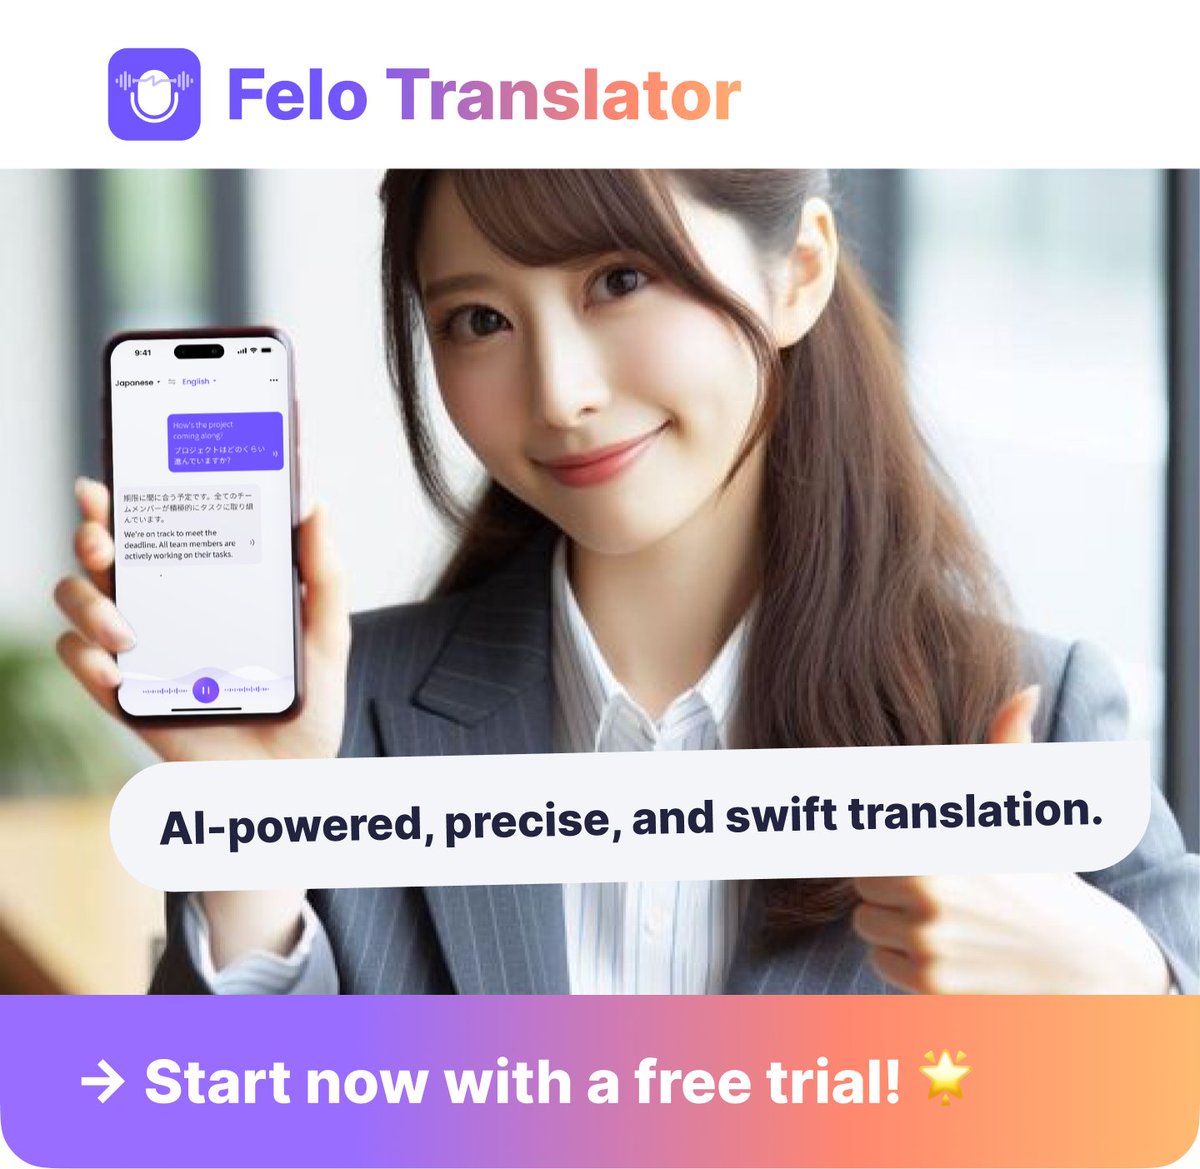 It's Friday! 🎉 
Tomorrow's a day off, but where should I go? 
If you have any multilingual concerns, give Felo Instant Translator a try! I'm the latest AI real-time translation app! 🌐
 #FeloInstantTranslator #WeekendPlans #MultilingualSupport 🌟